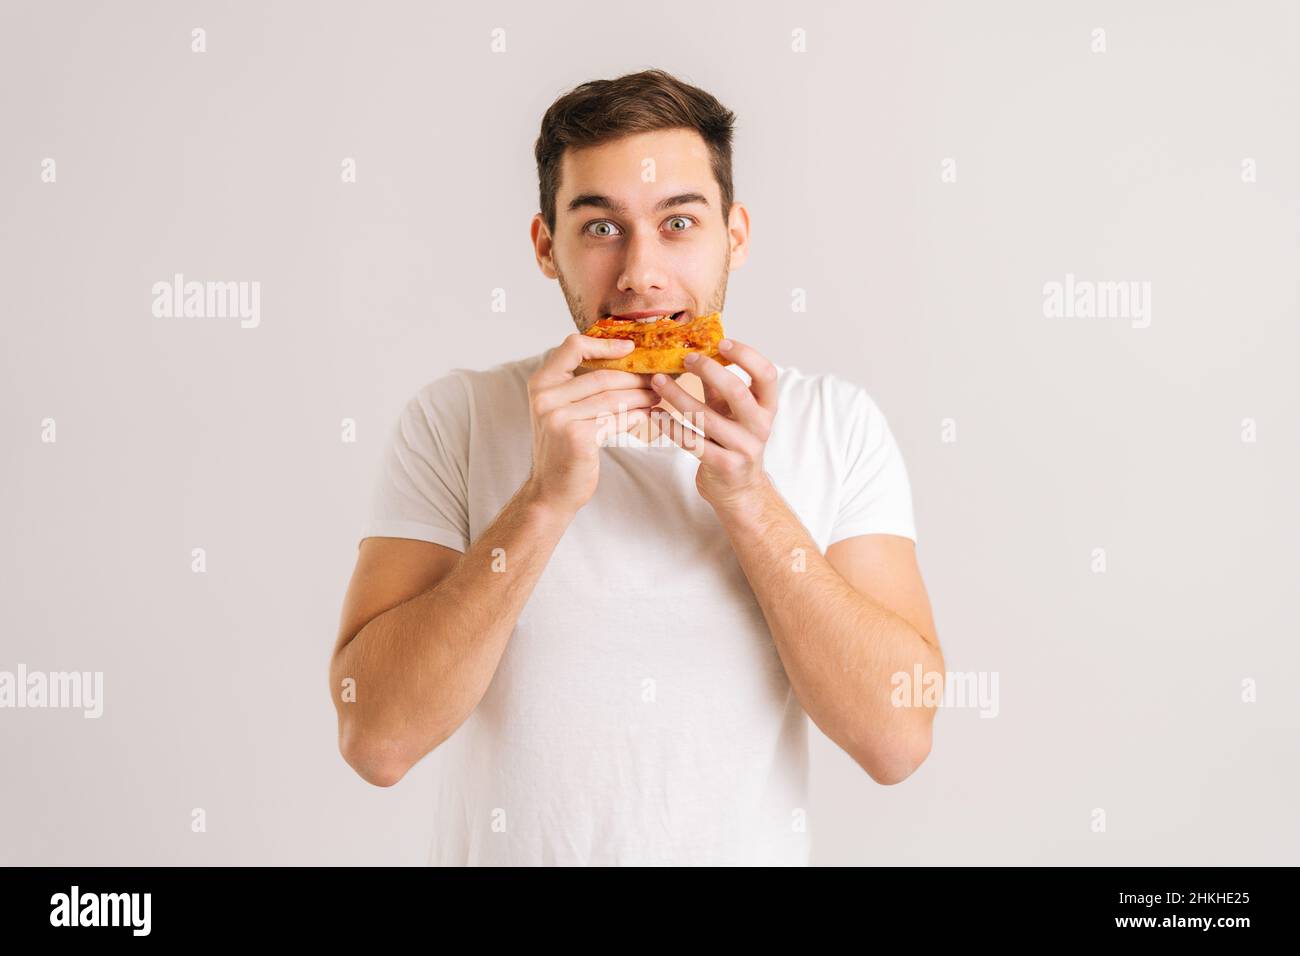 Portrait of happy young man bitting delicious slice of pizza looking at camera on white isolated background. Stock Photo